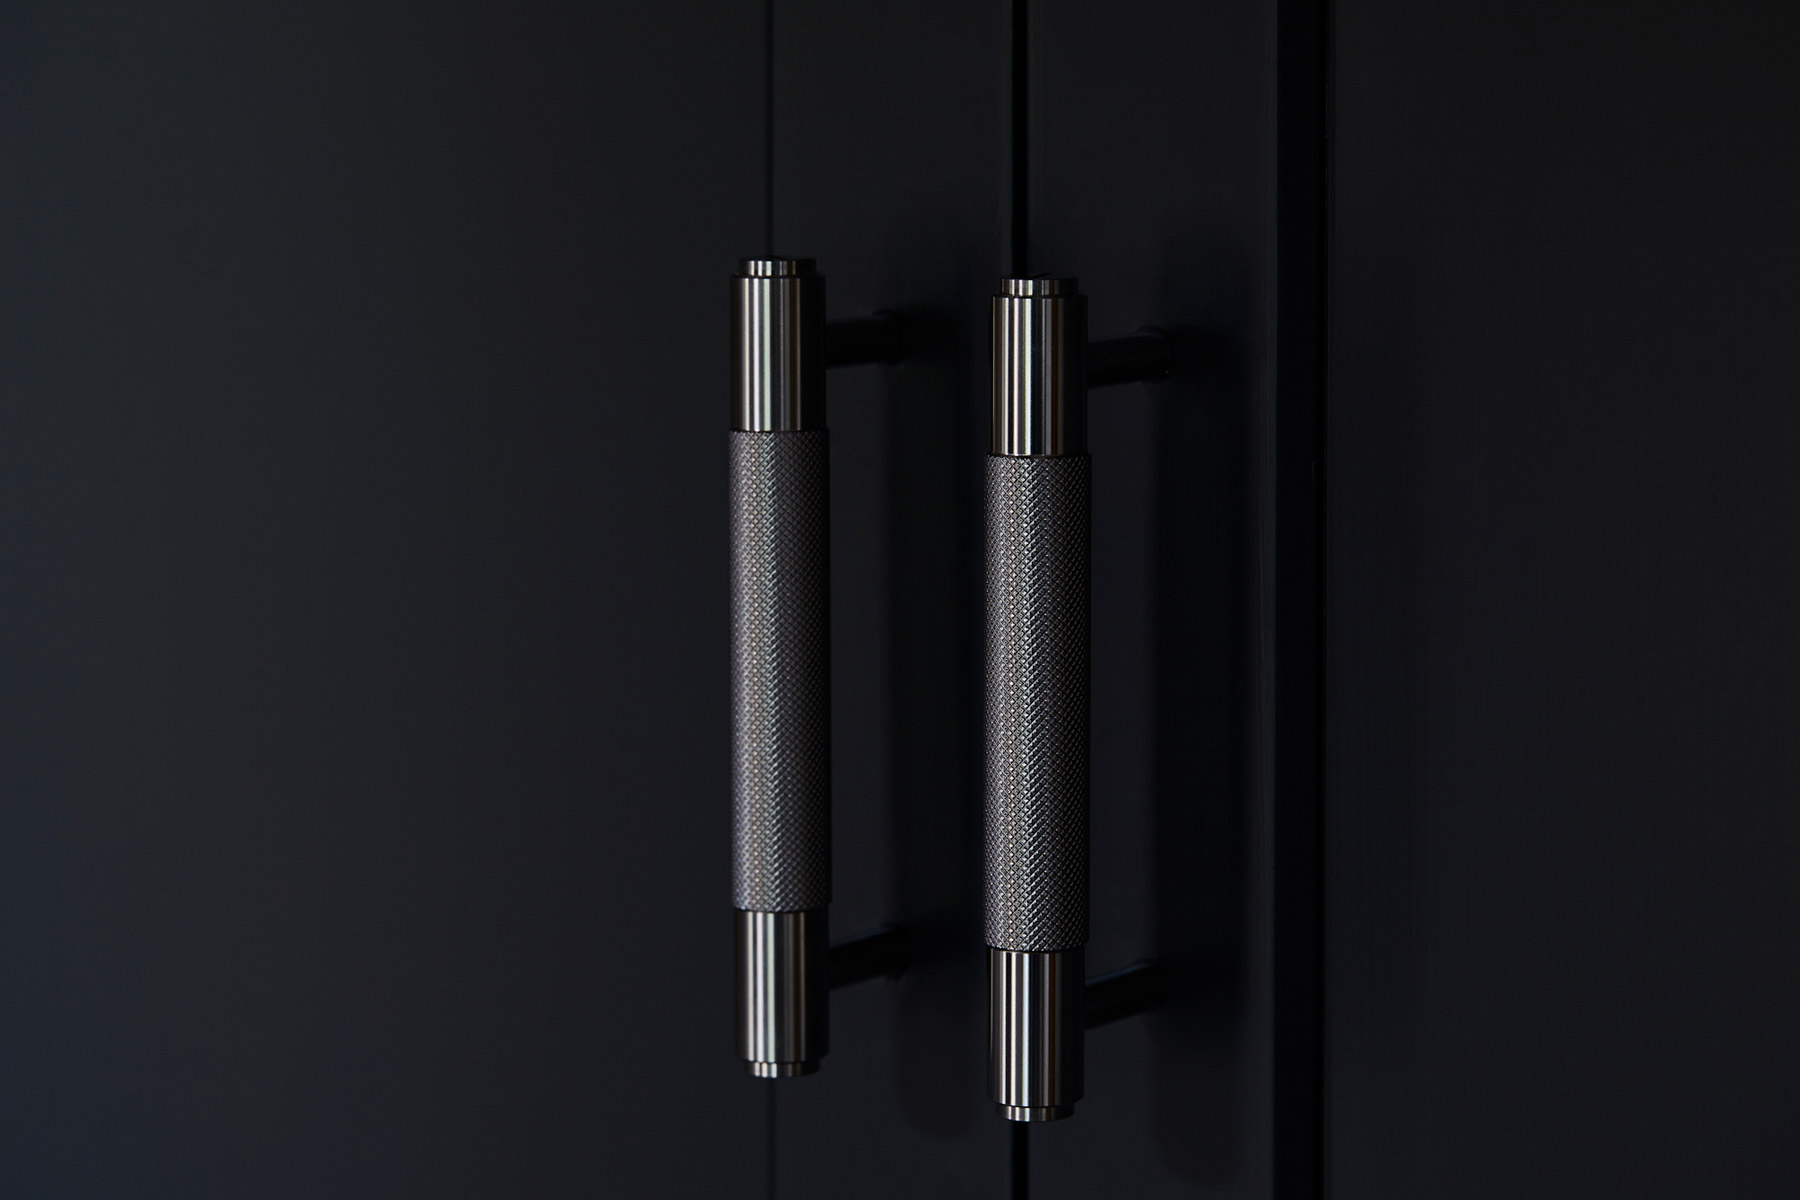 Knurled Buster + Punch brass kitchen handles on painted dark black cabinets